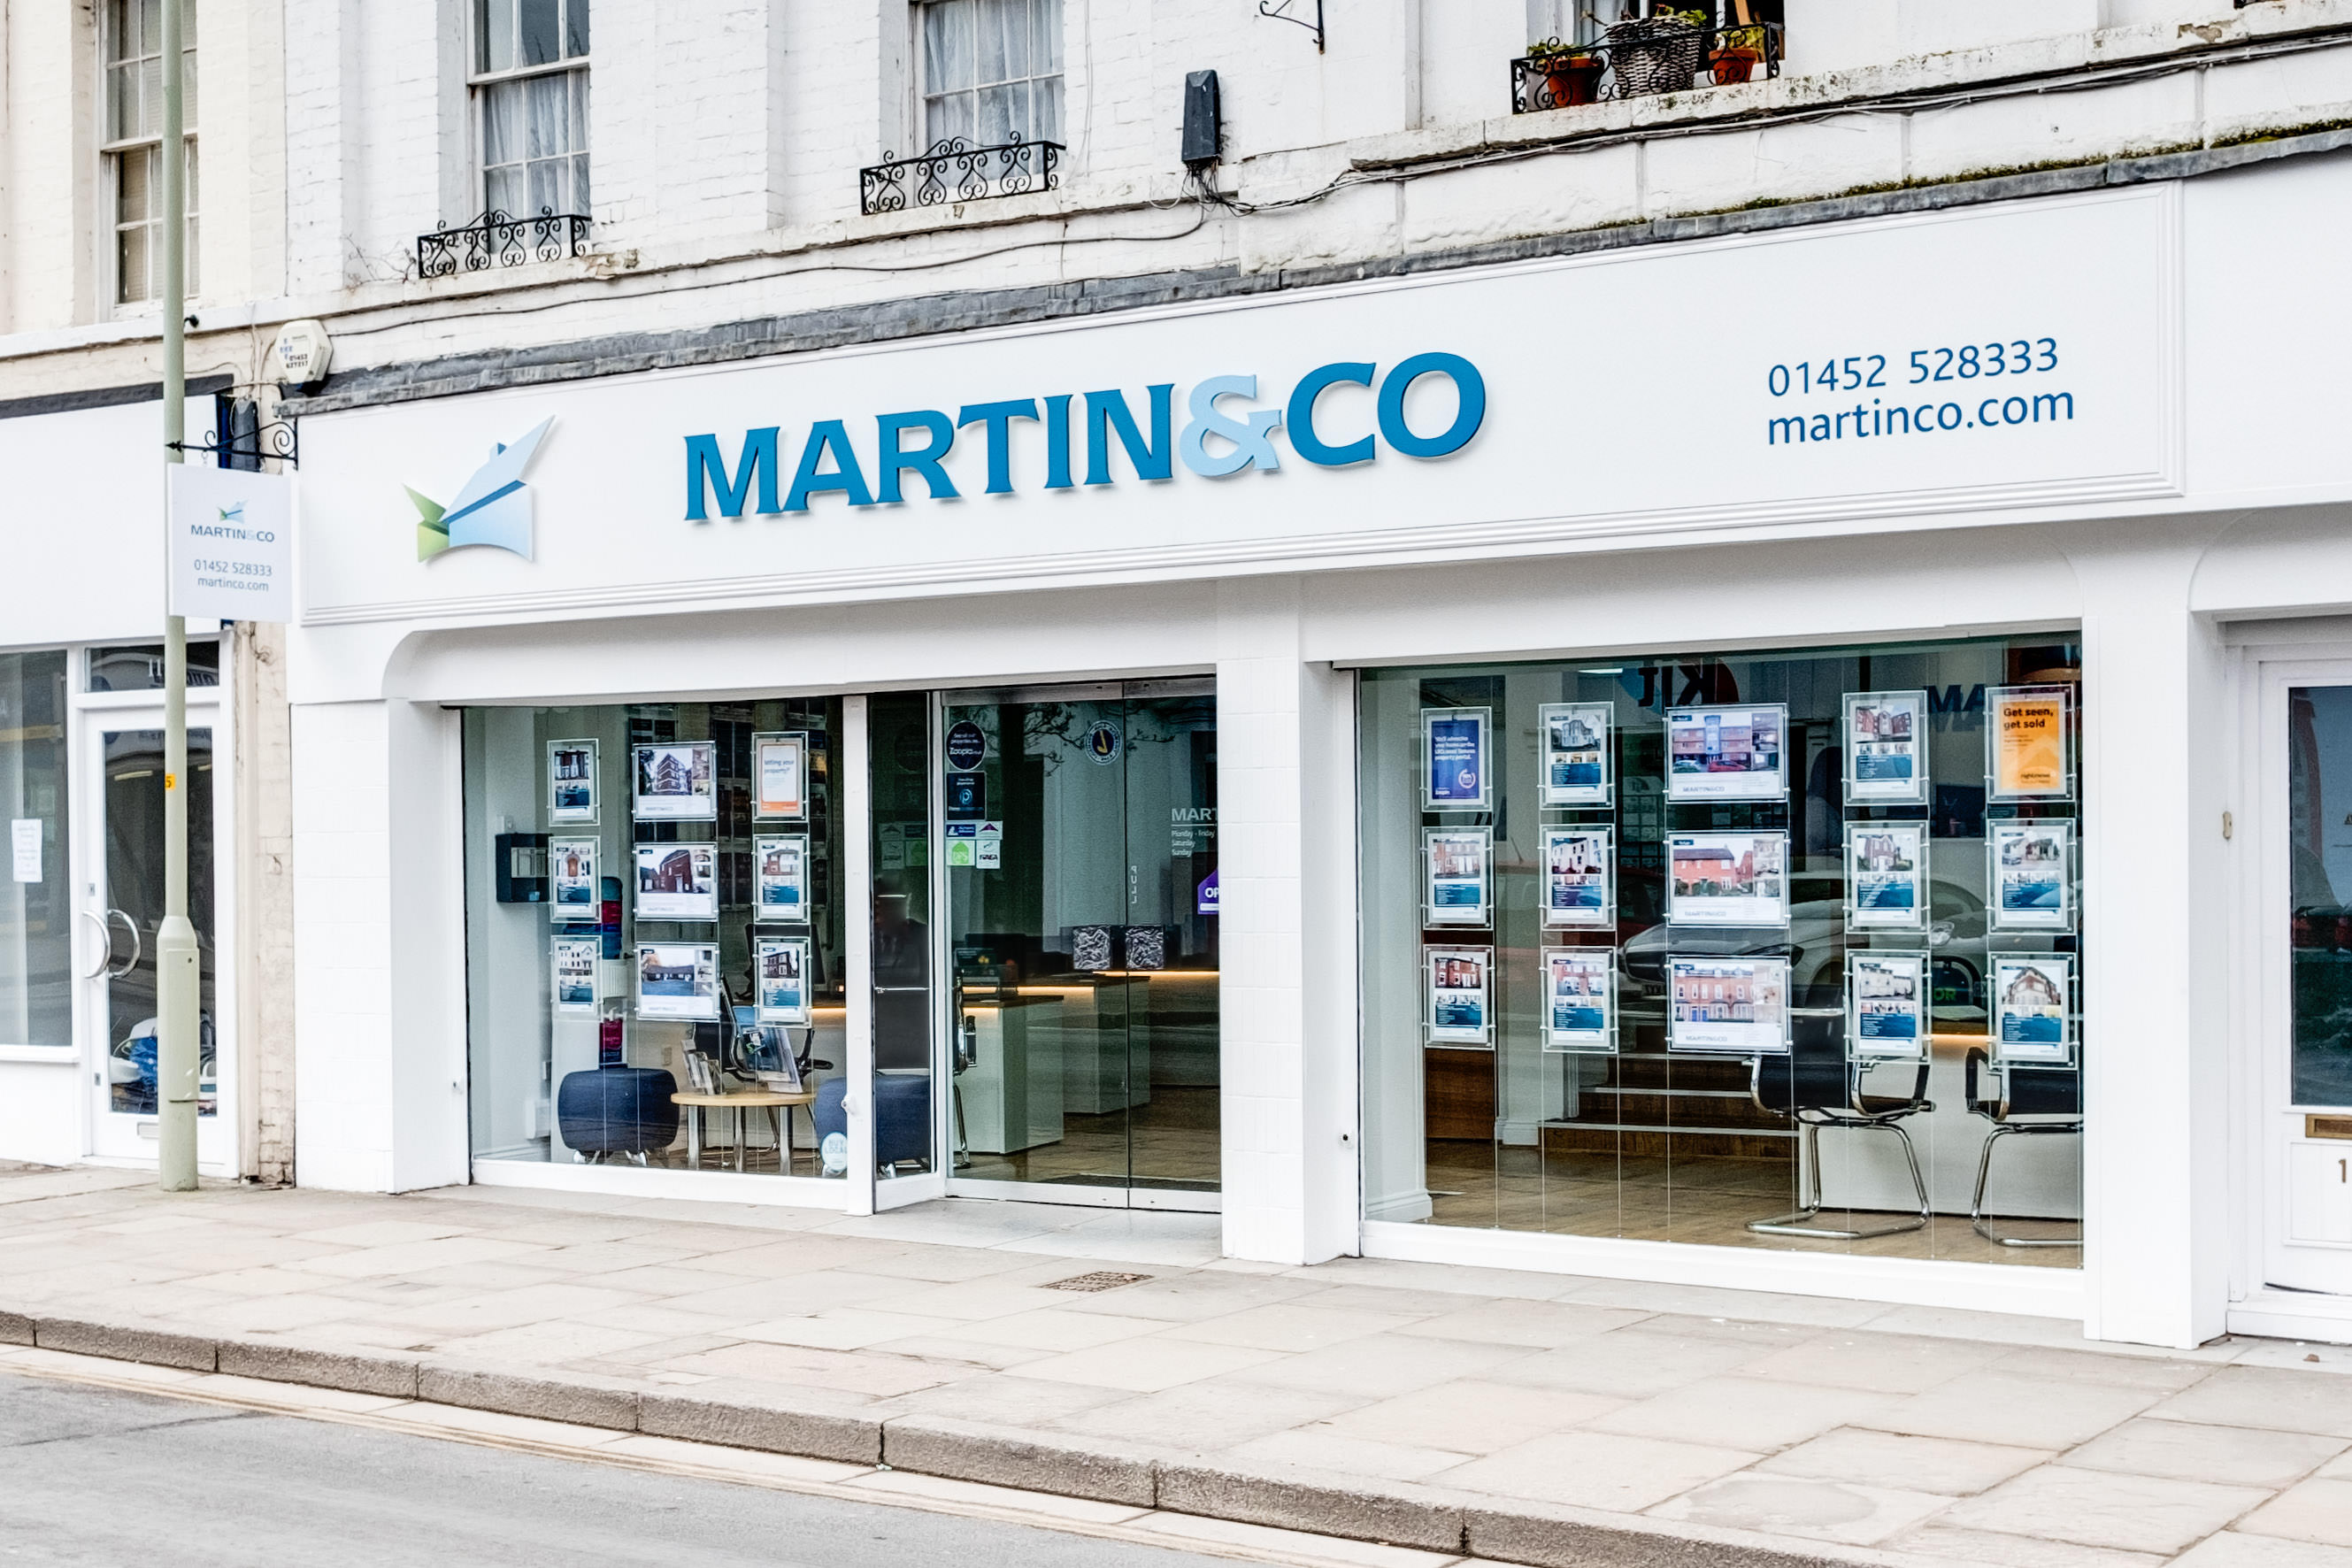 Martin & Co Gloucester Lettings & Estate Agents - Gloucestershire, Gloucestershire GL1 3AJ - 01452 528333 | ShowMeLocal.com